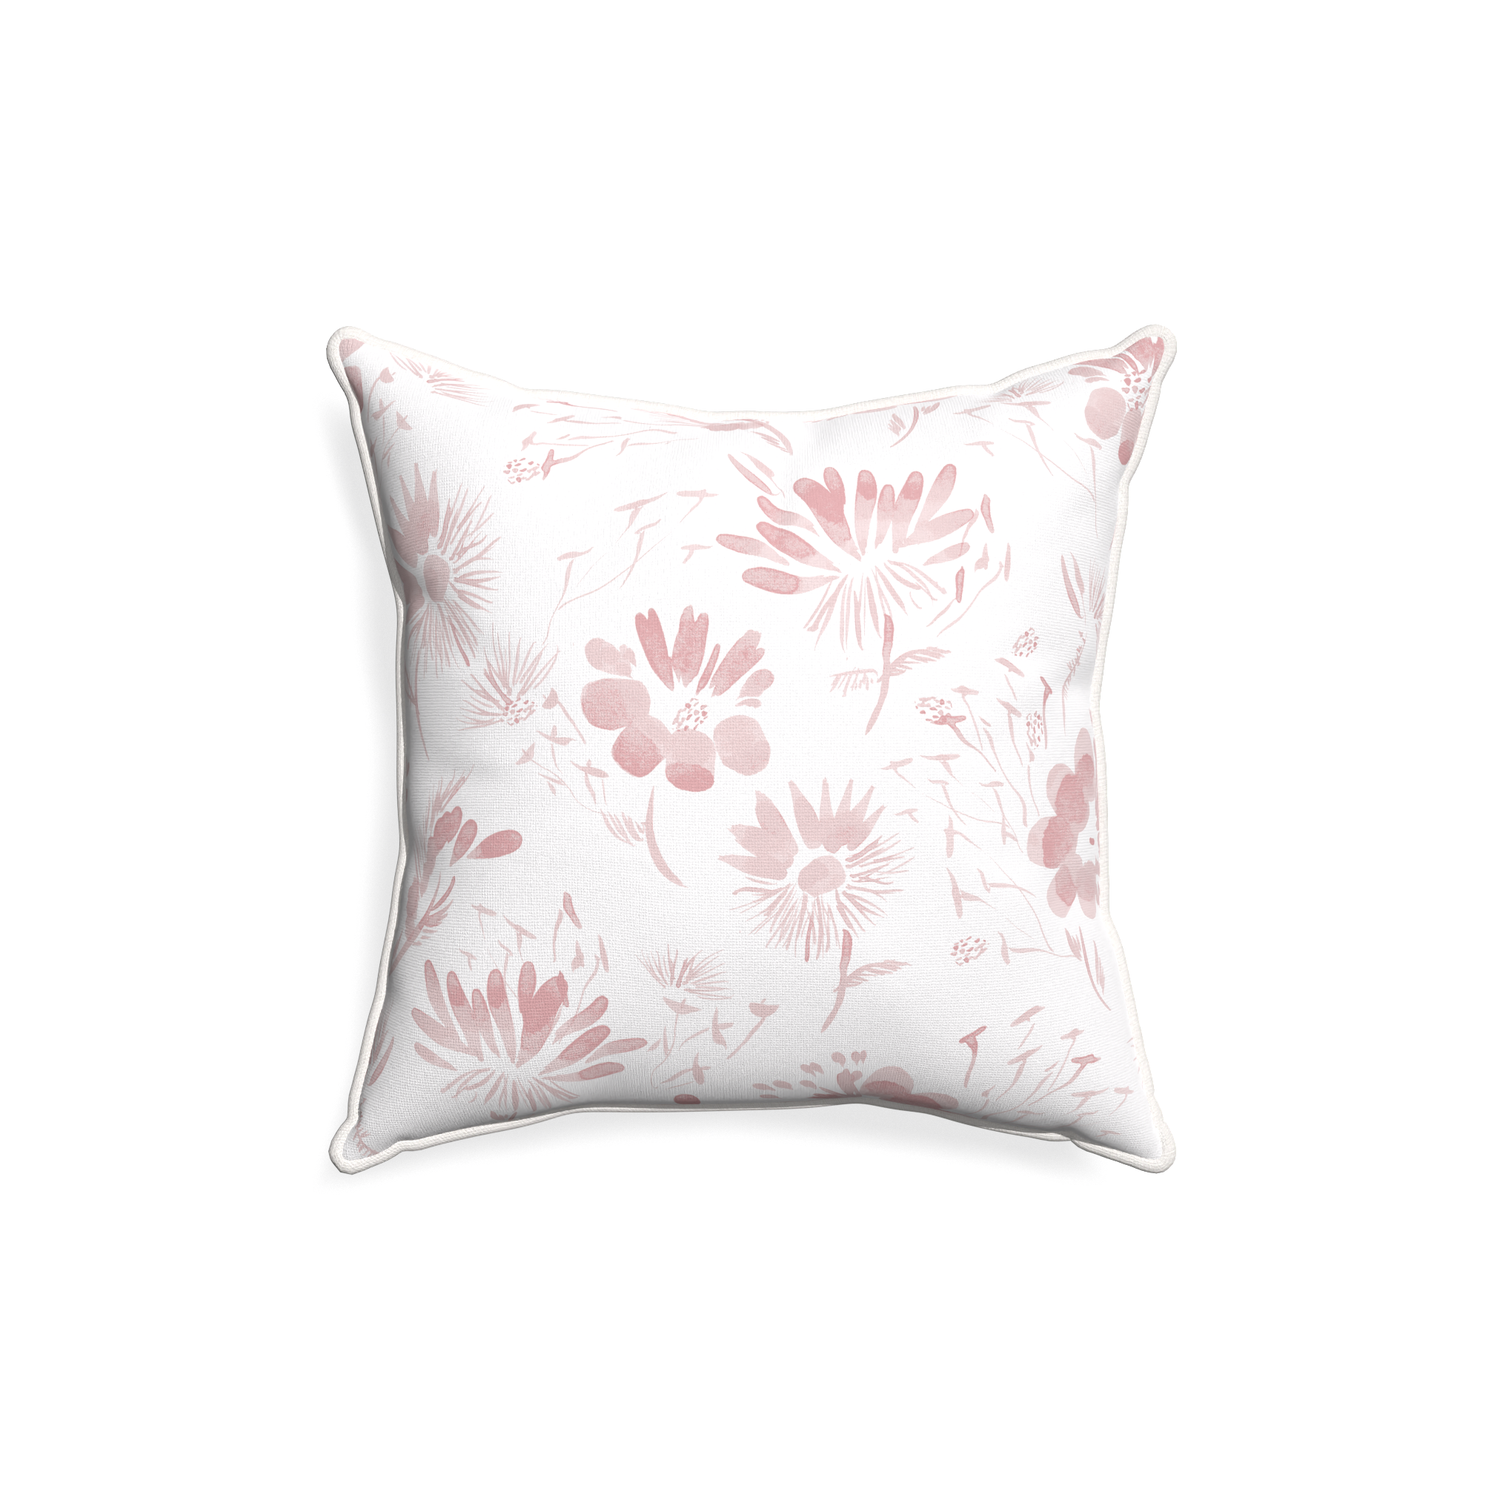 18-square blake custom pillow with snow piping on white background